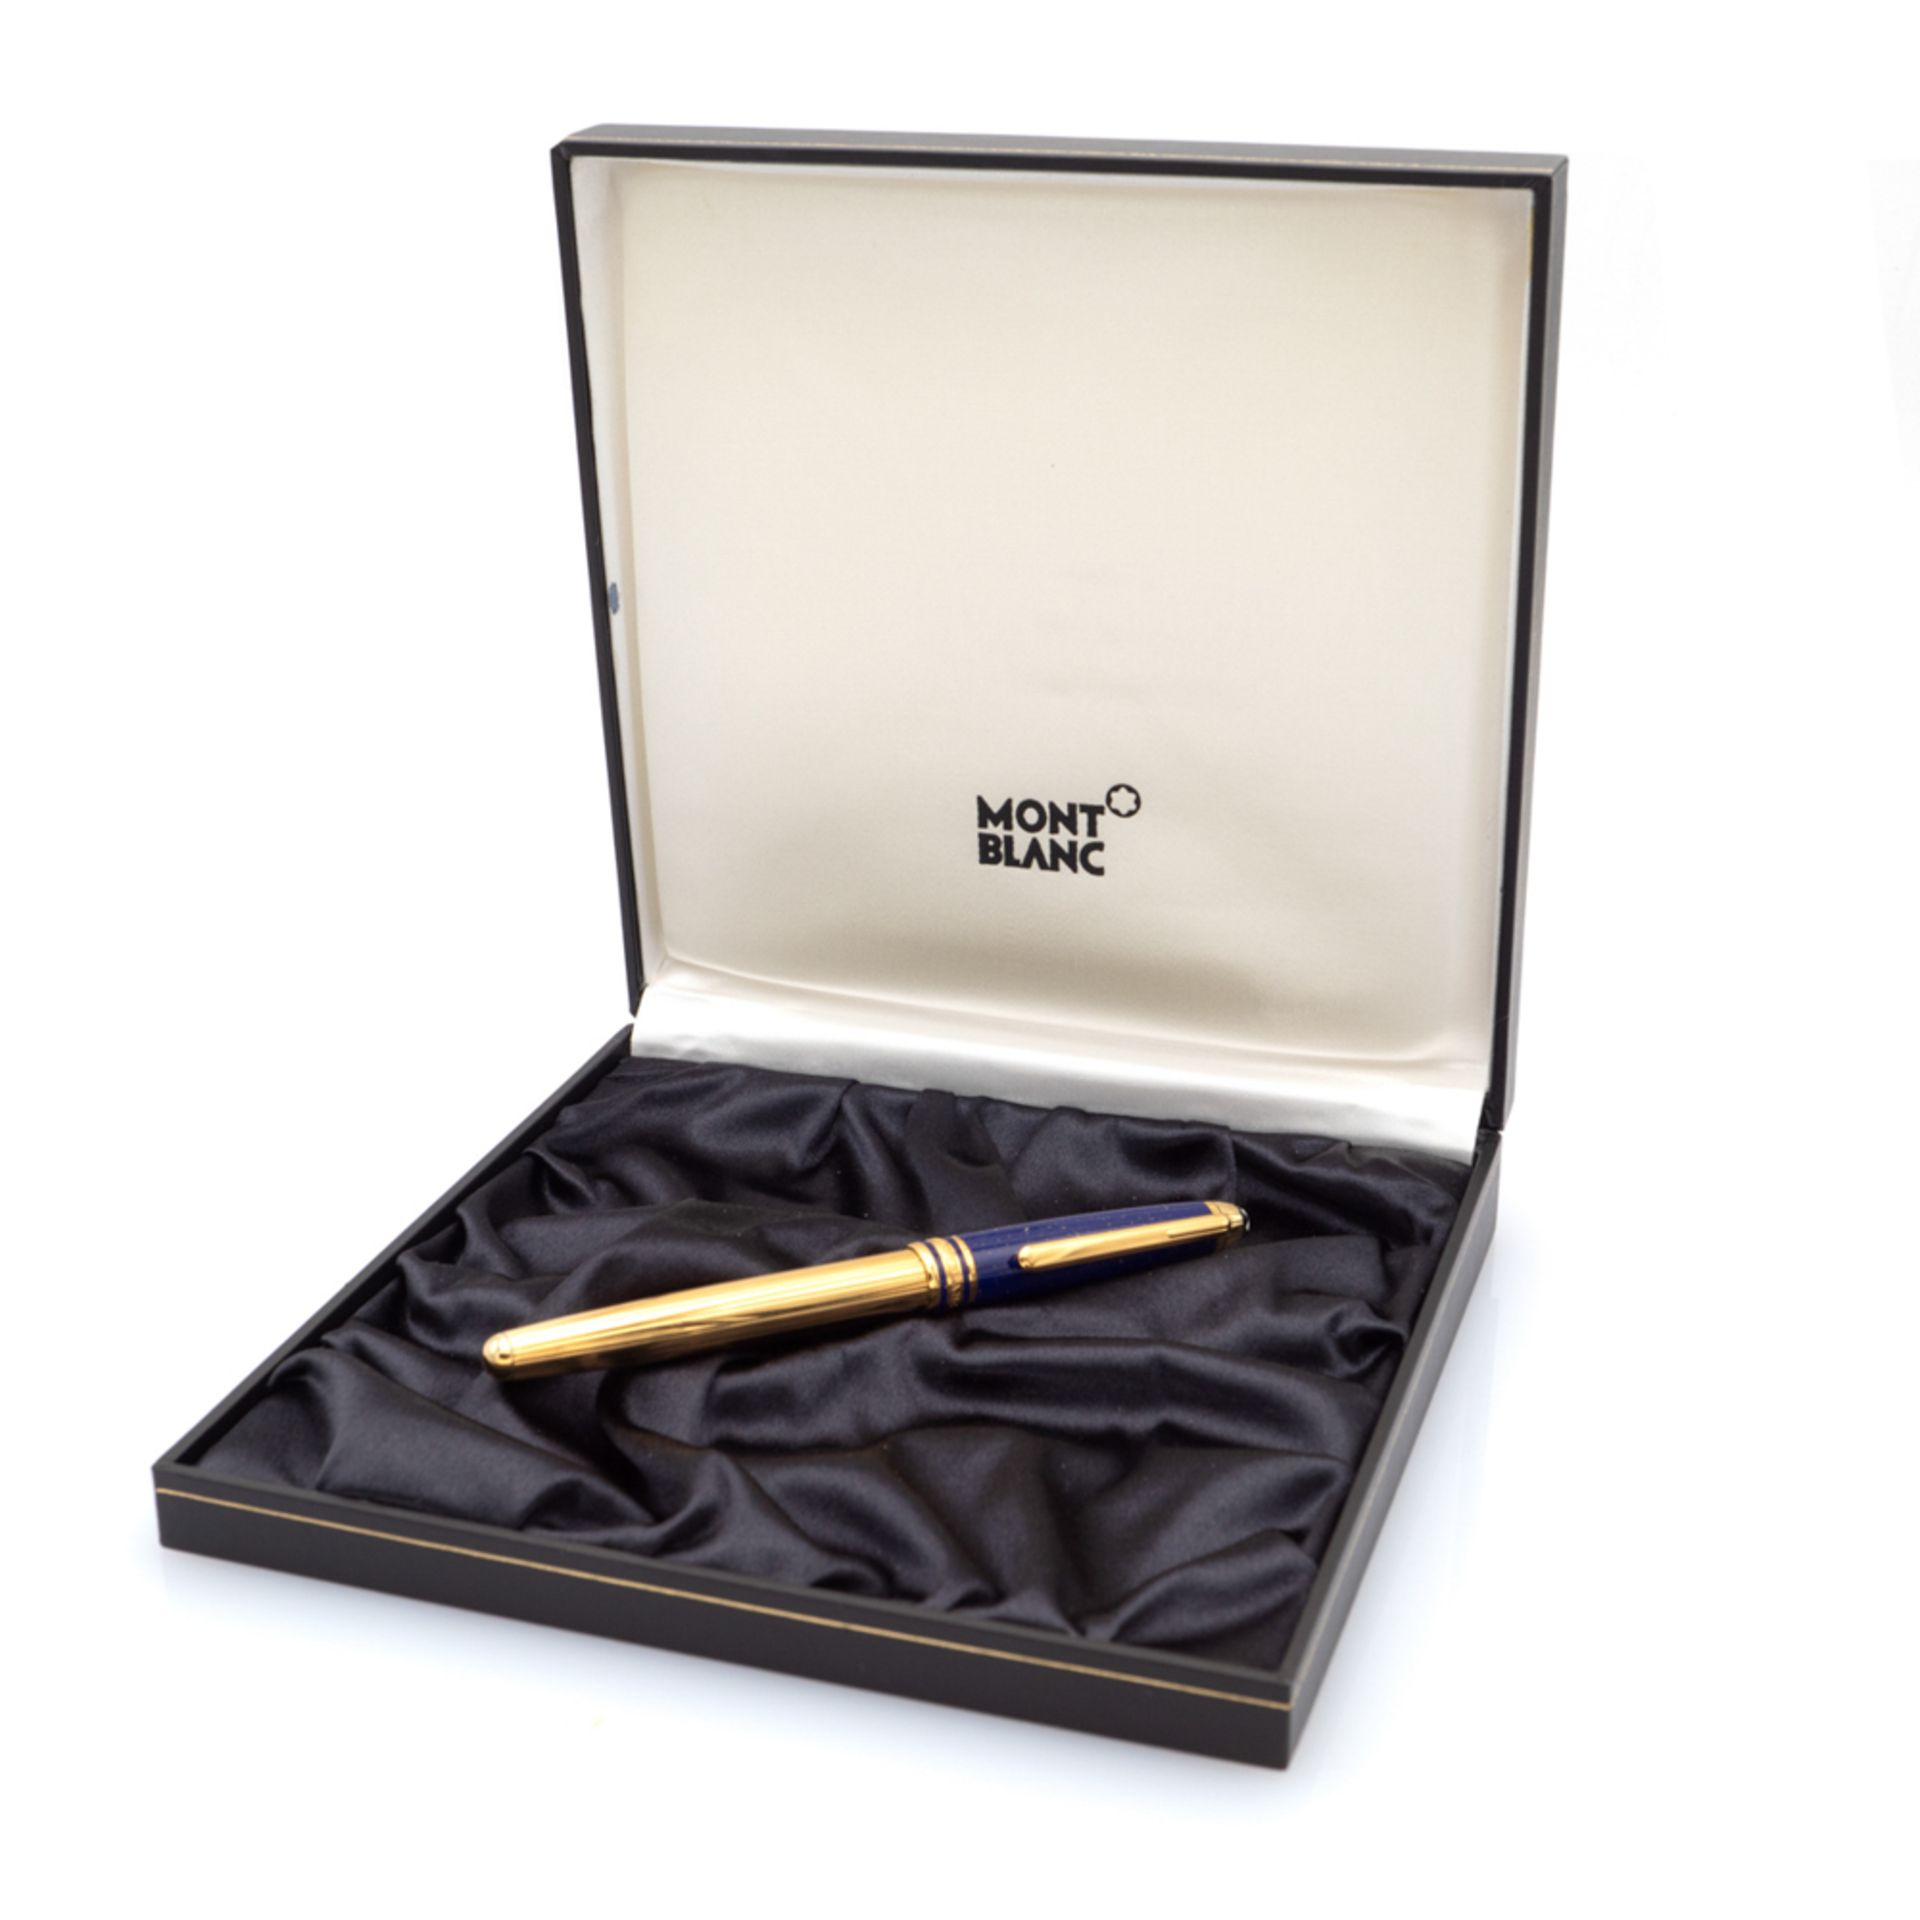 Montblanc Meisterstuck Ramses II collection, fountain pen 1990s circa l. 13,5 cm. - Image 2 of 3